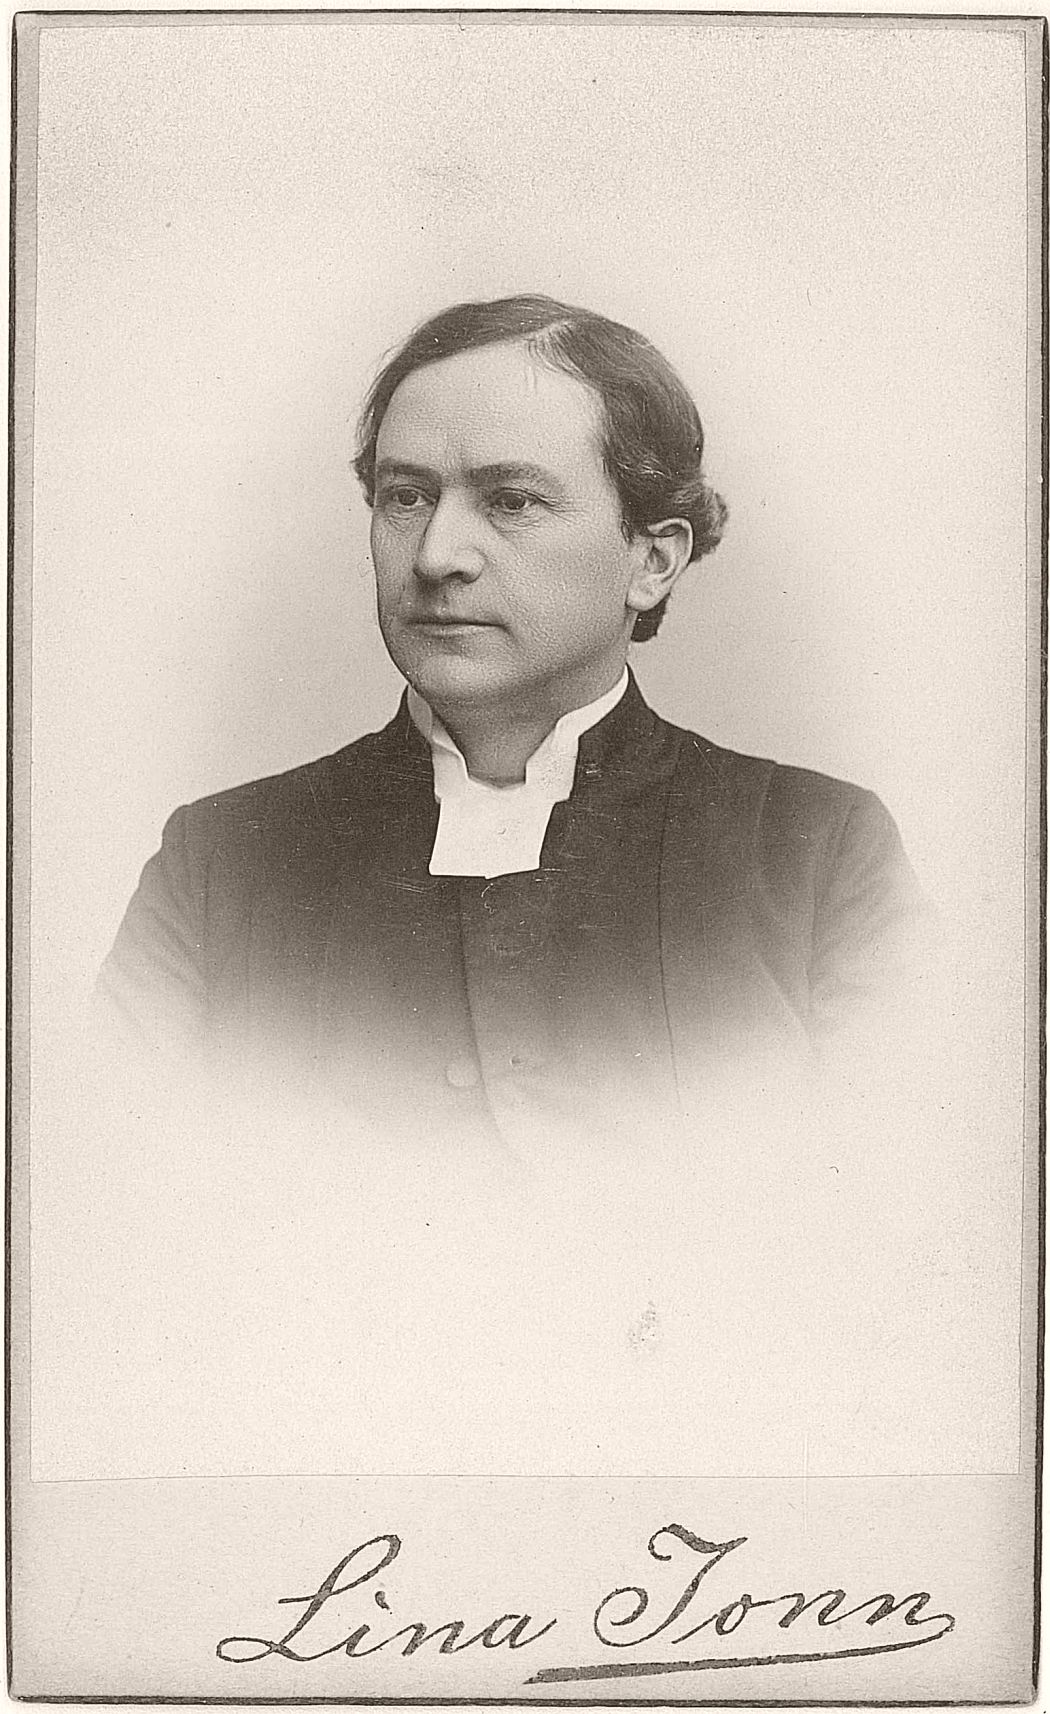 Magnus Pfannenstill (1858-1940), Swedish theologian and clergyman, professor at en:Lund University and cathedral dean (domprost) in Lund.